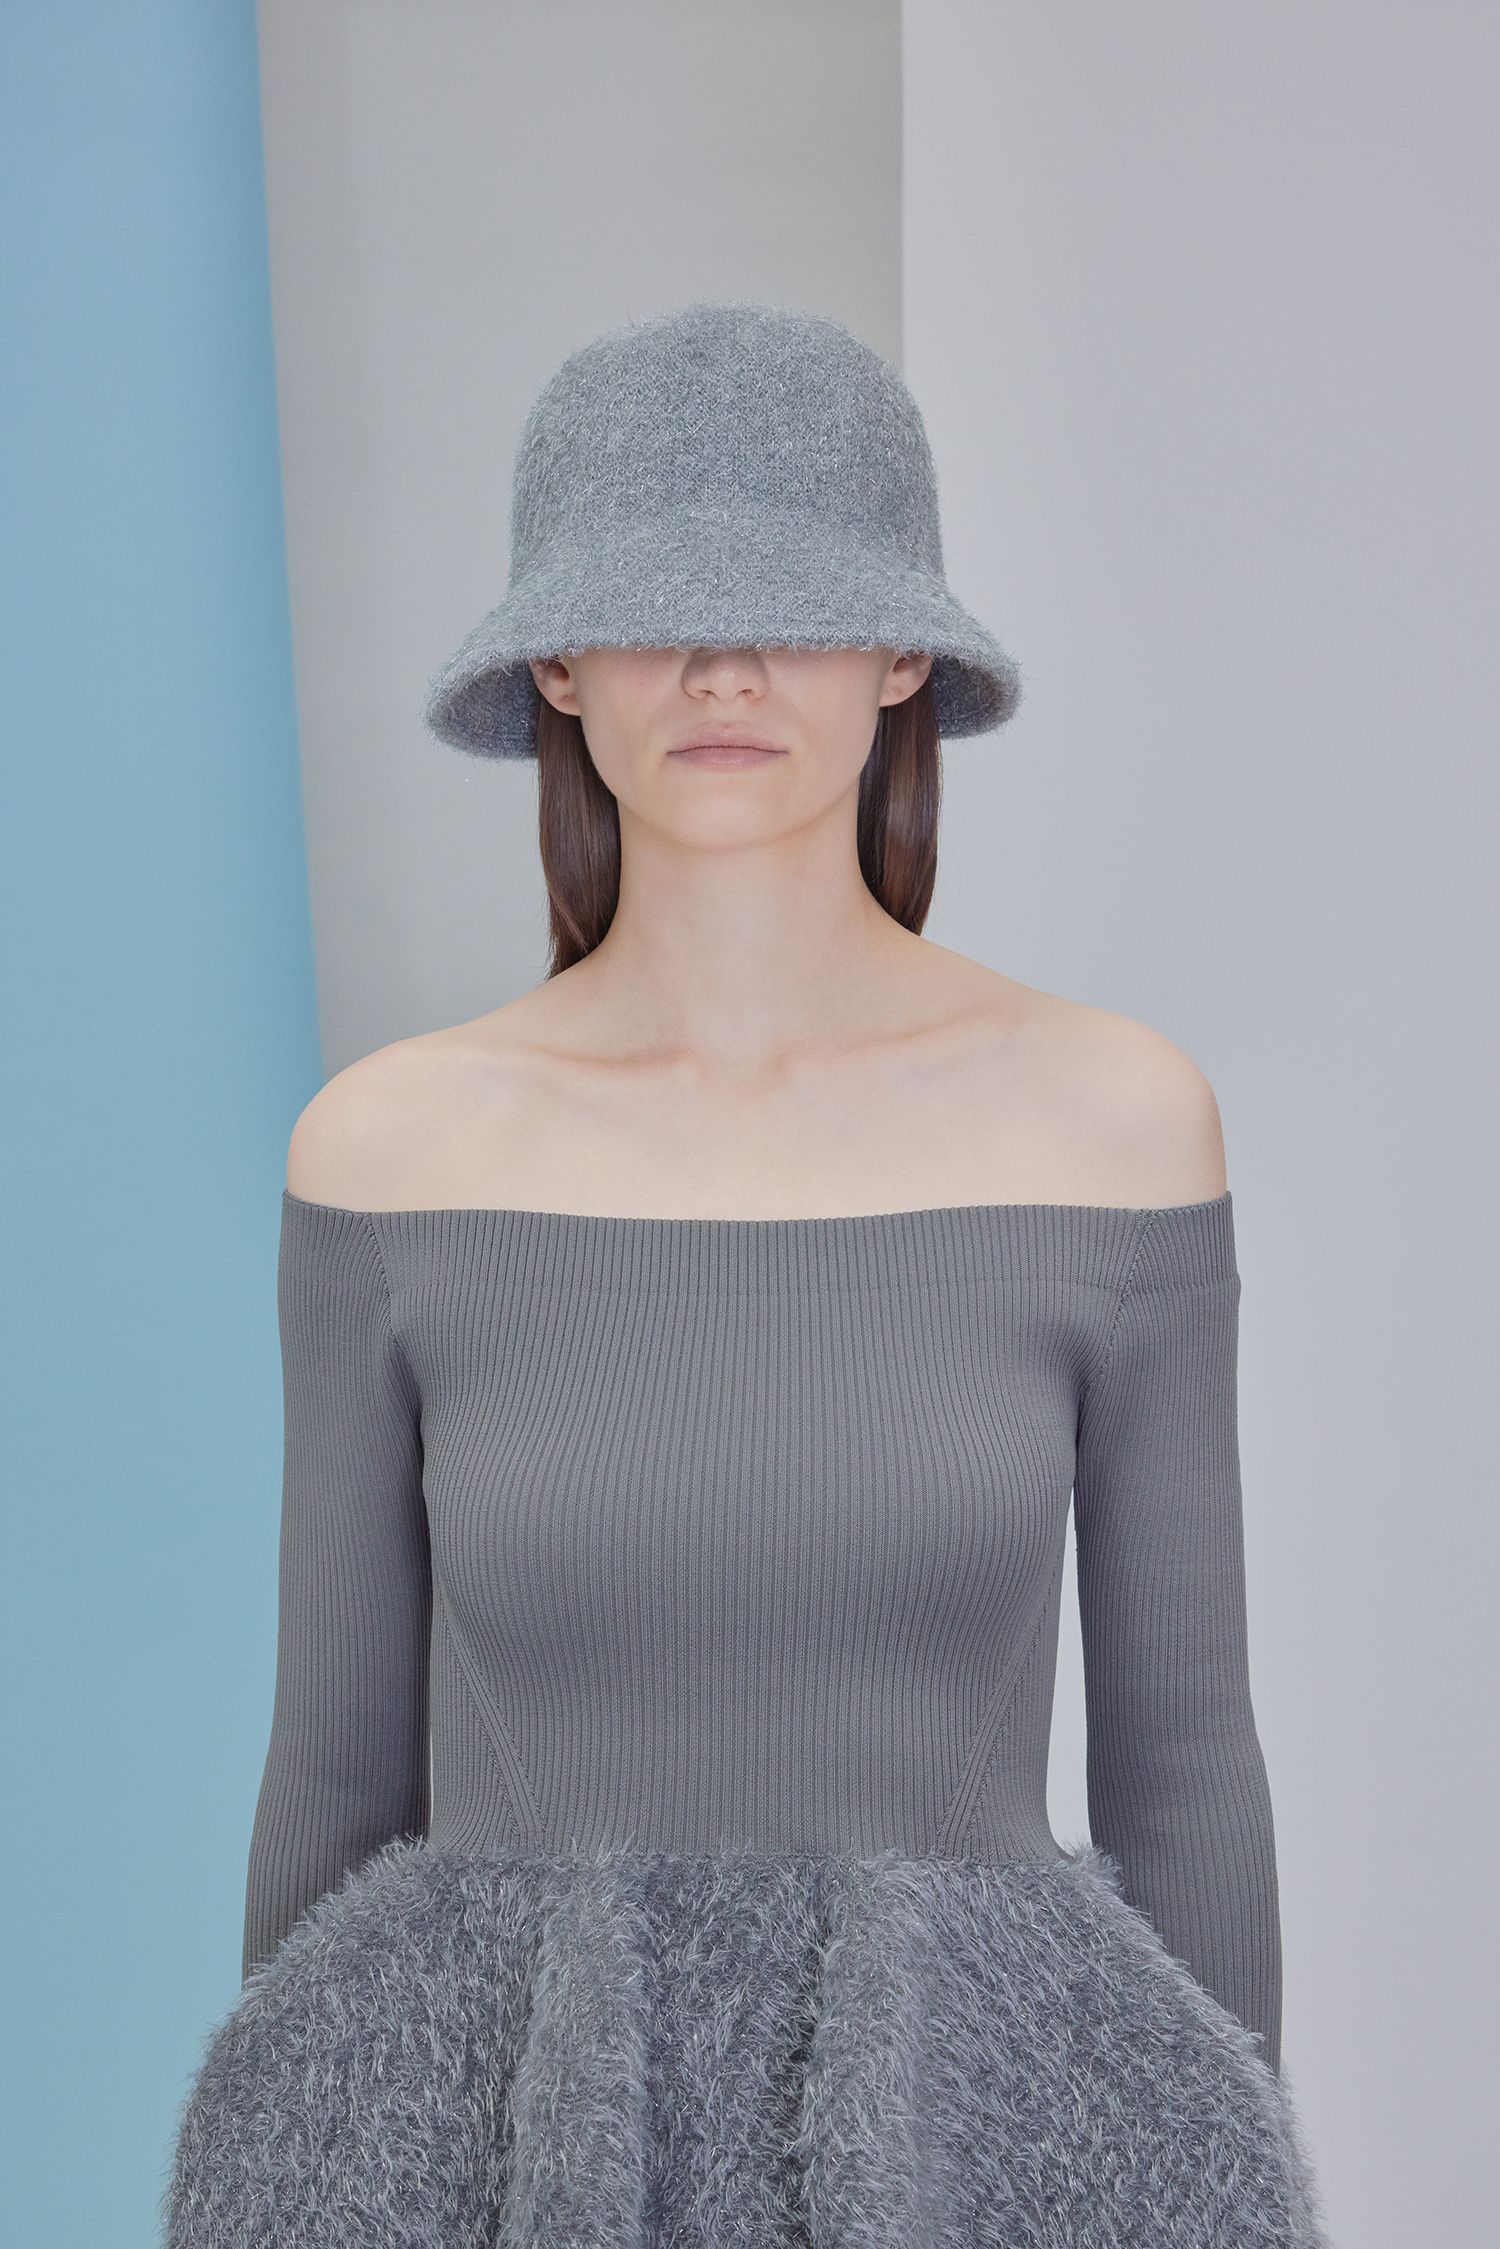 CFCL - MESH KNIT LUXE ASYMMETRIC HAT -iron gray- 23aw unisex